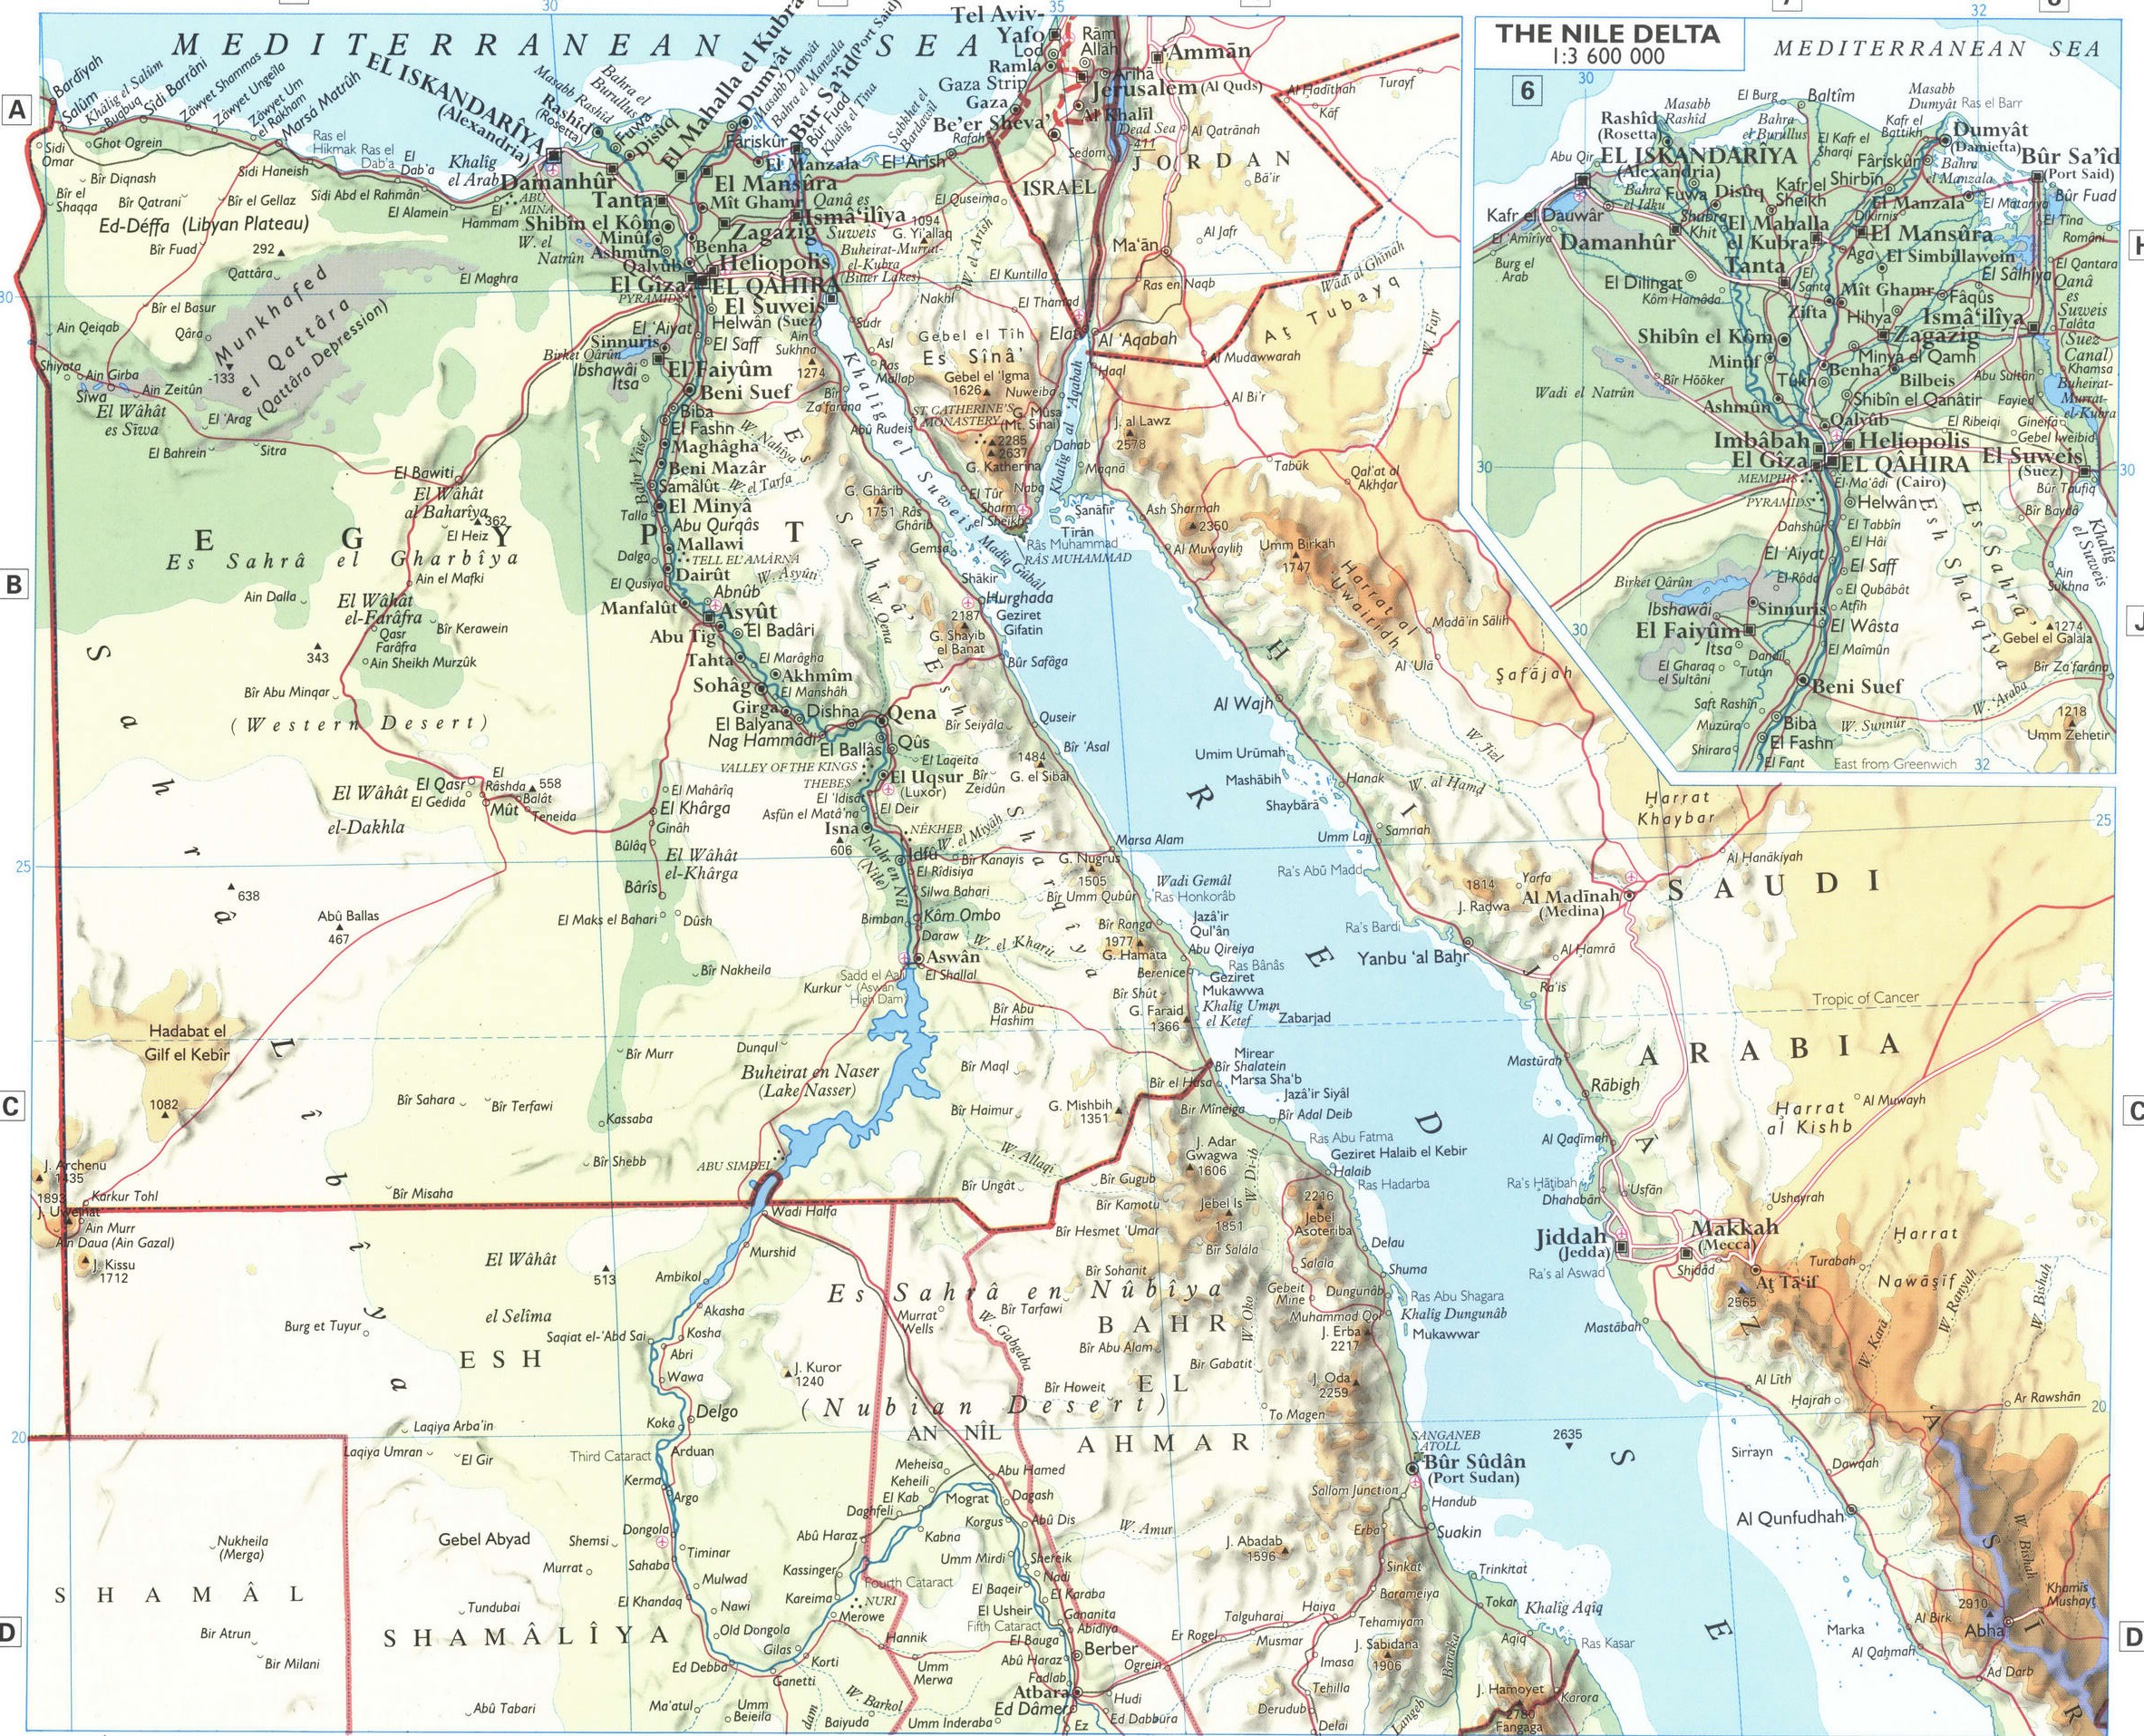 The Nile Valley map